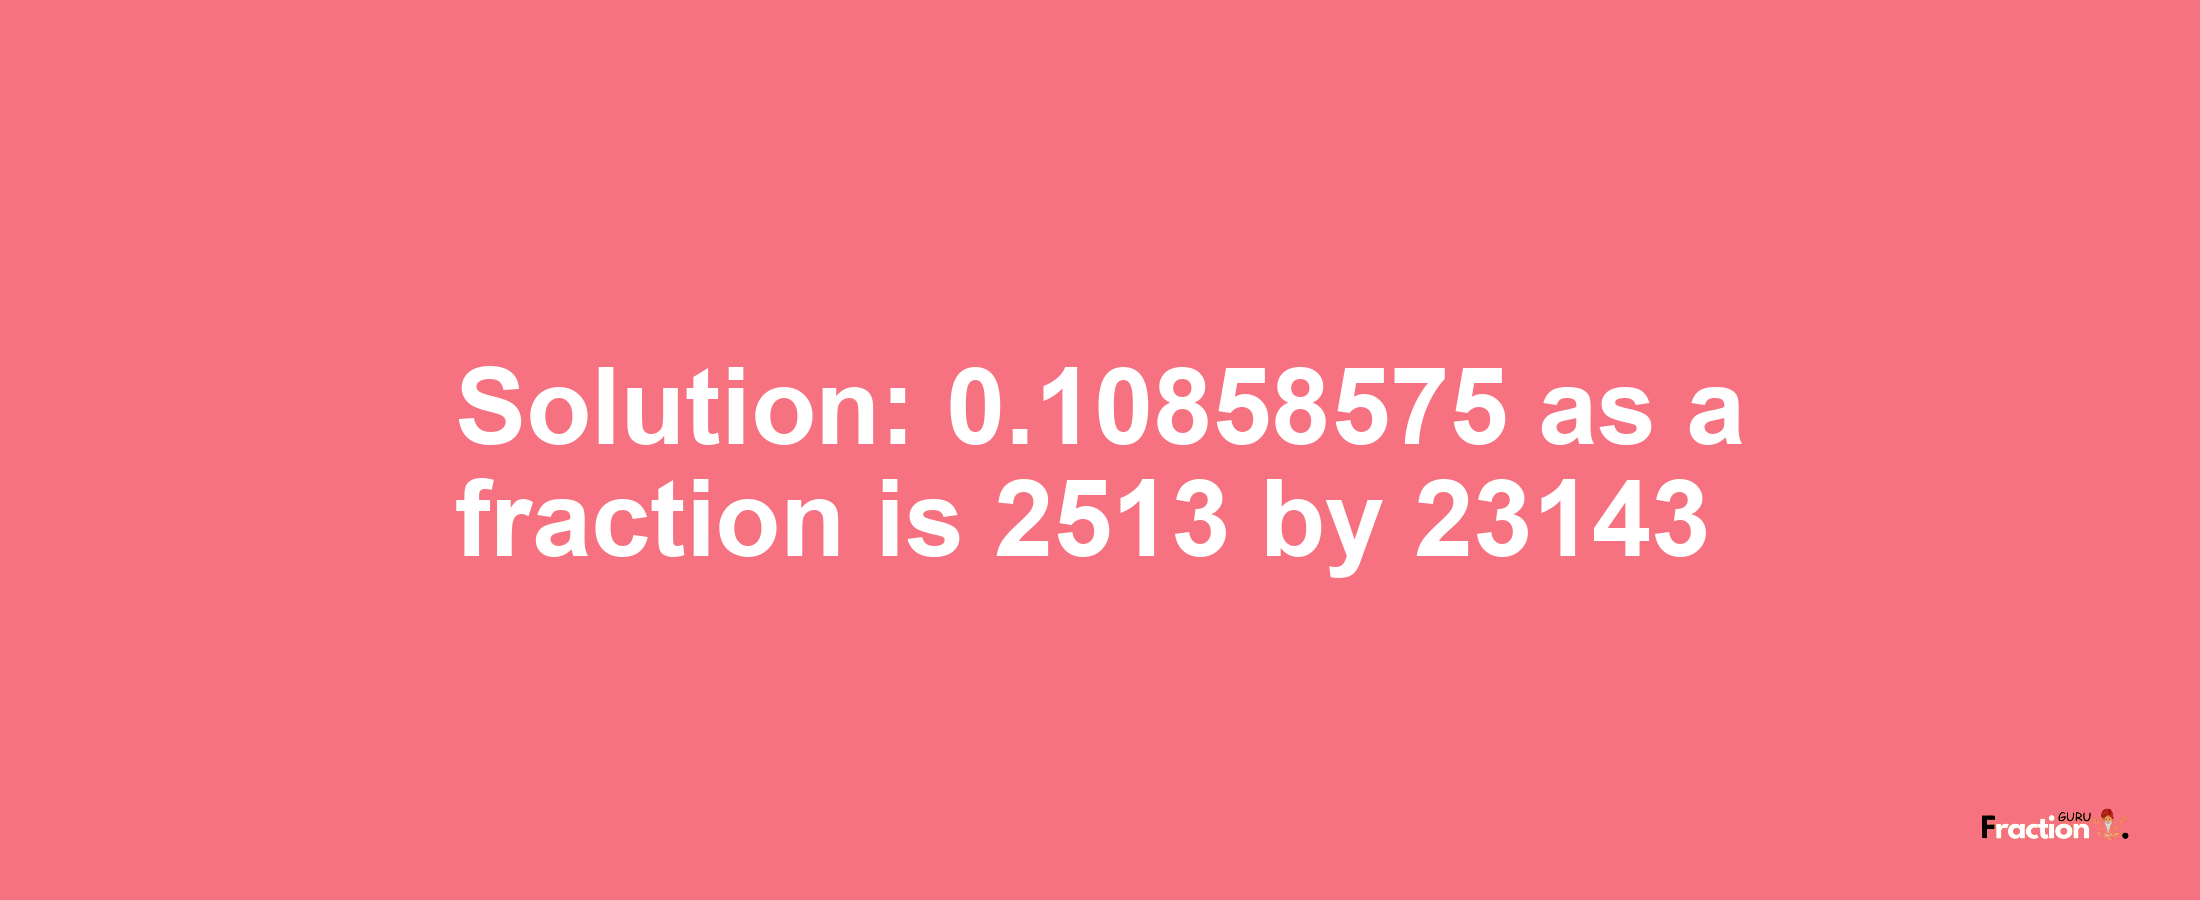 Solution:0.10858575 as a fraction is 2513/23143